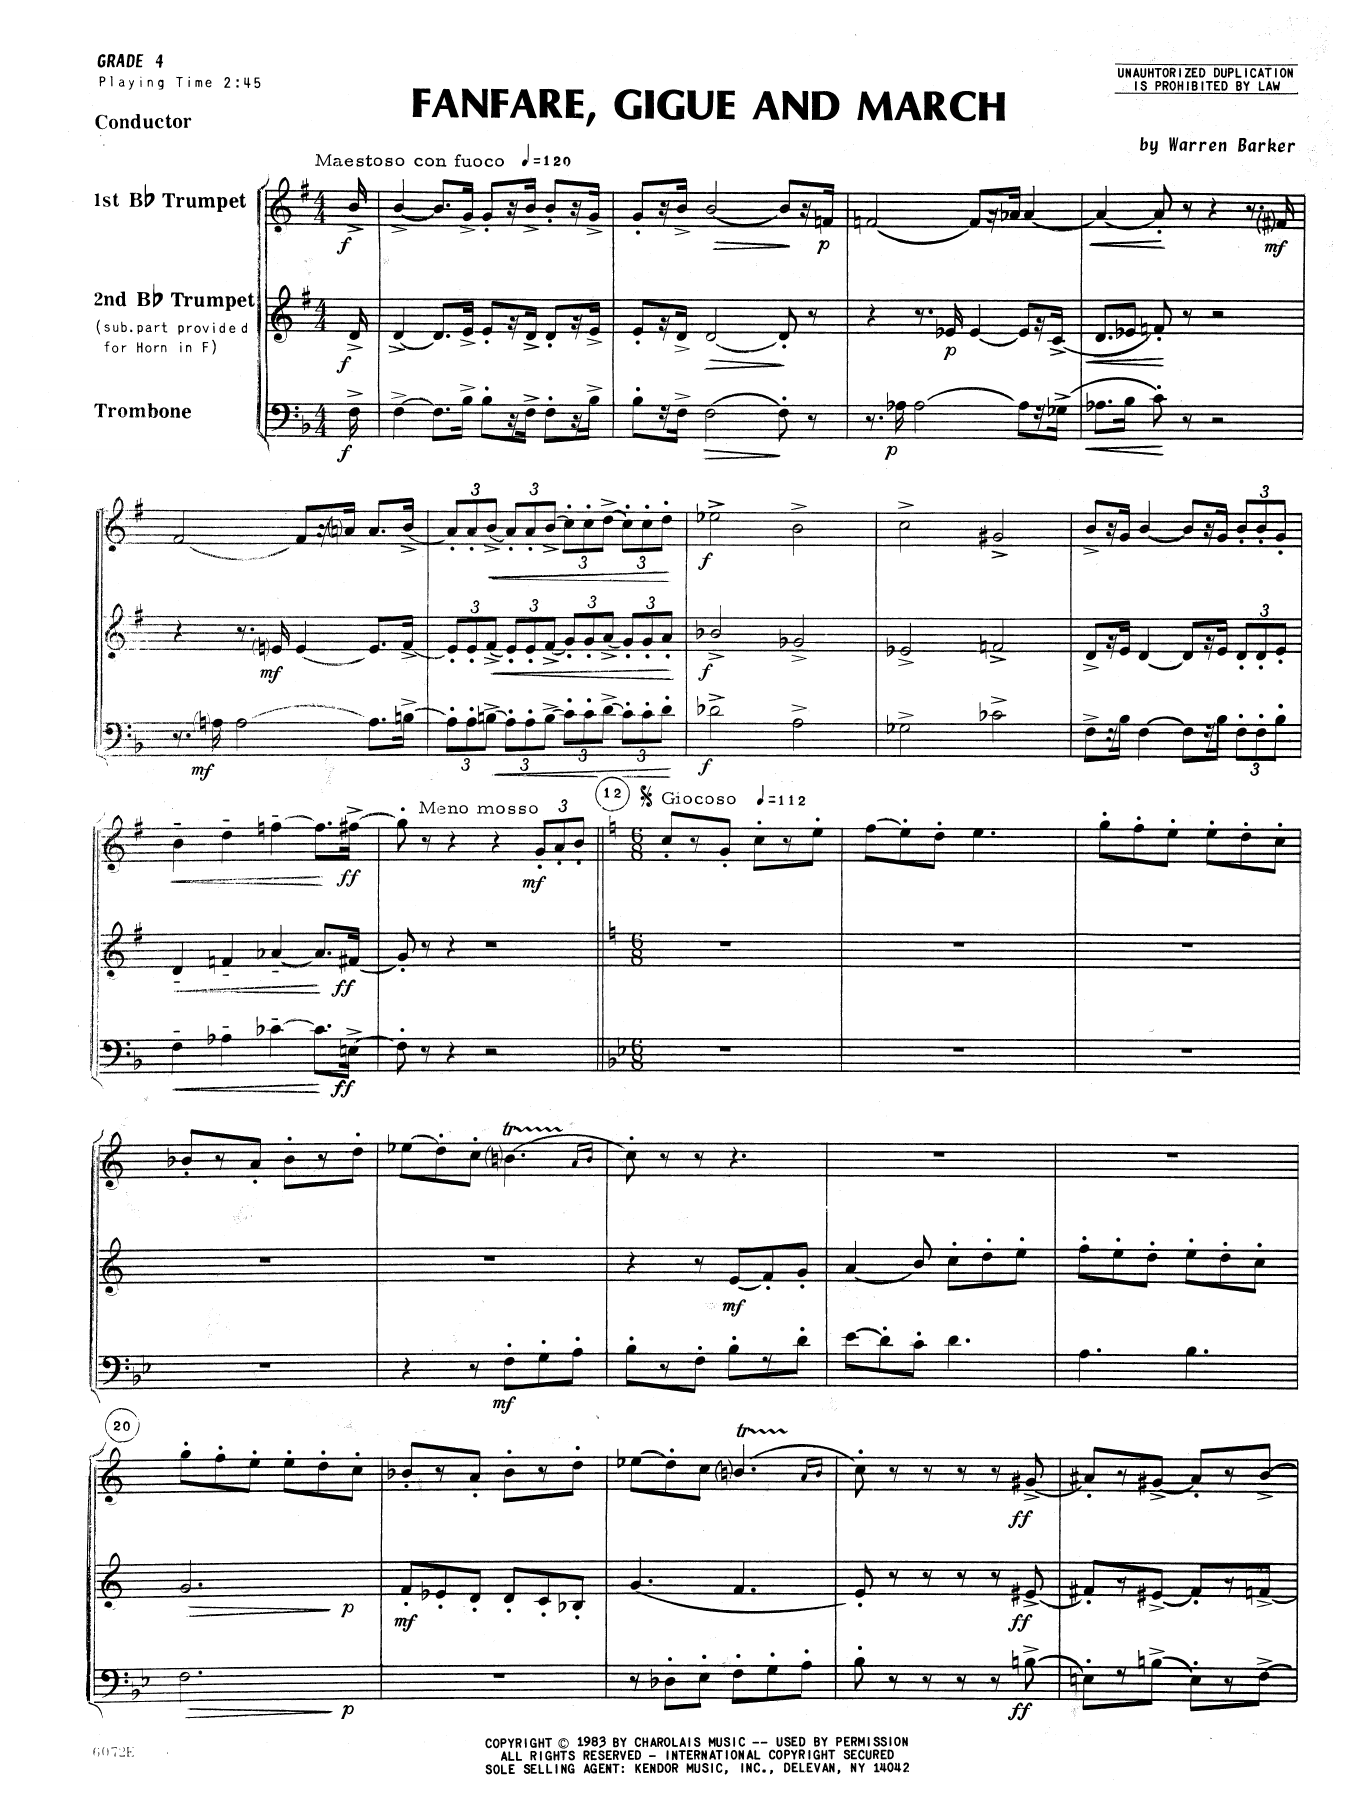 Download Barker Fanfare, Gigue And March - Full Score Sheet Music